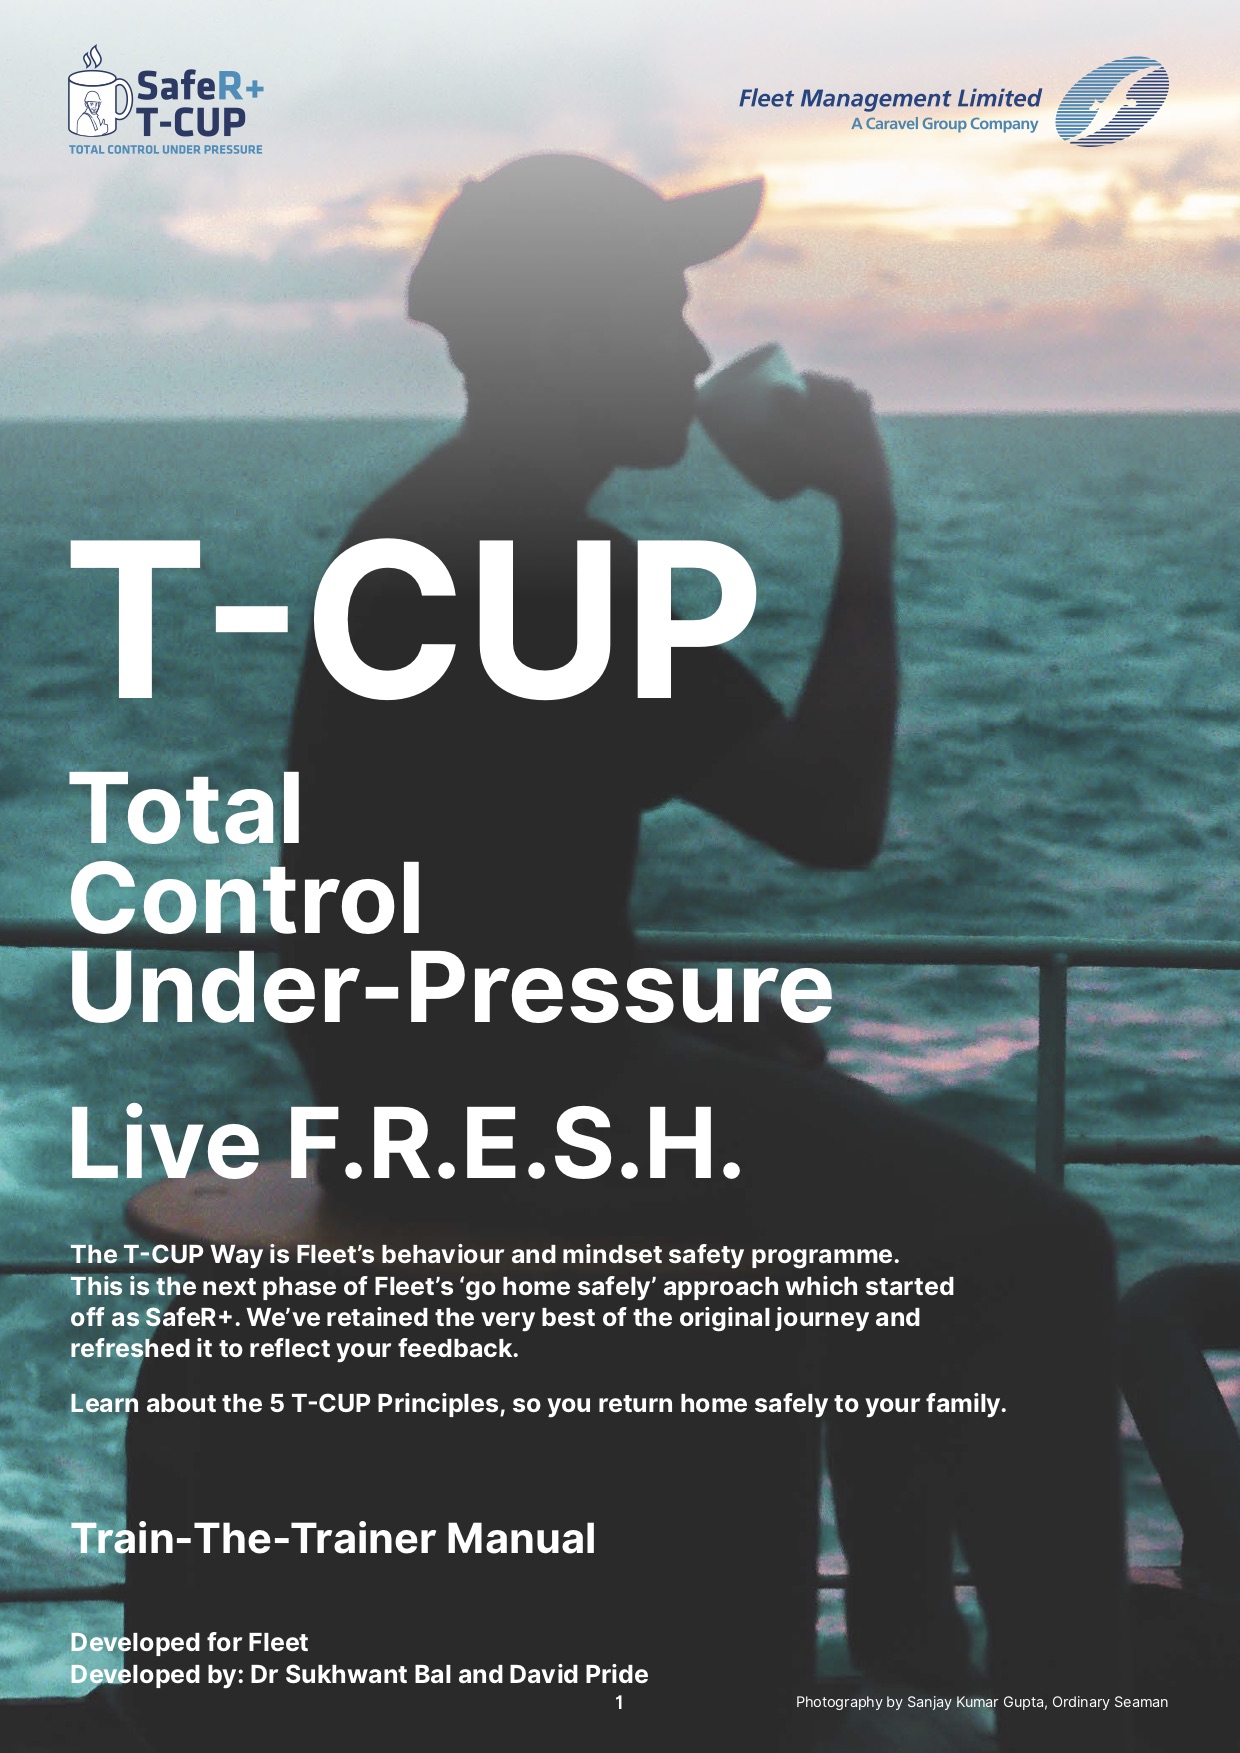 Introducing T-CUP: The next milestone on our safety journey